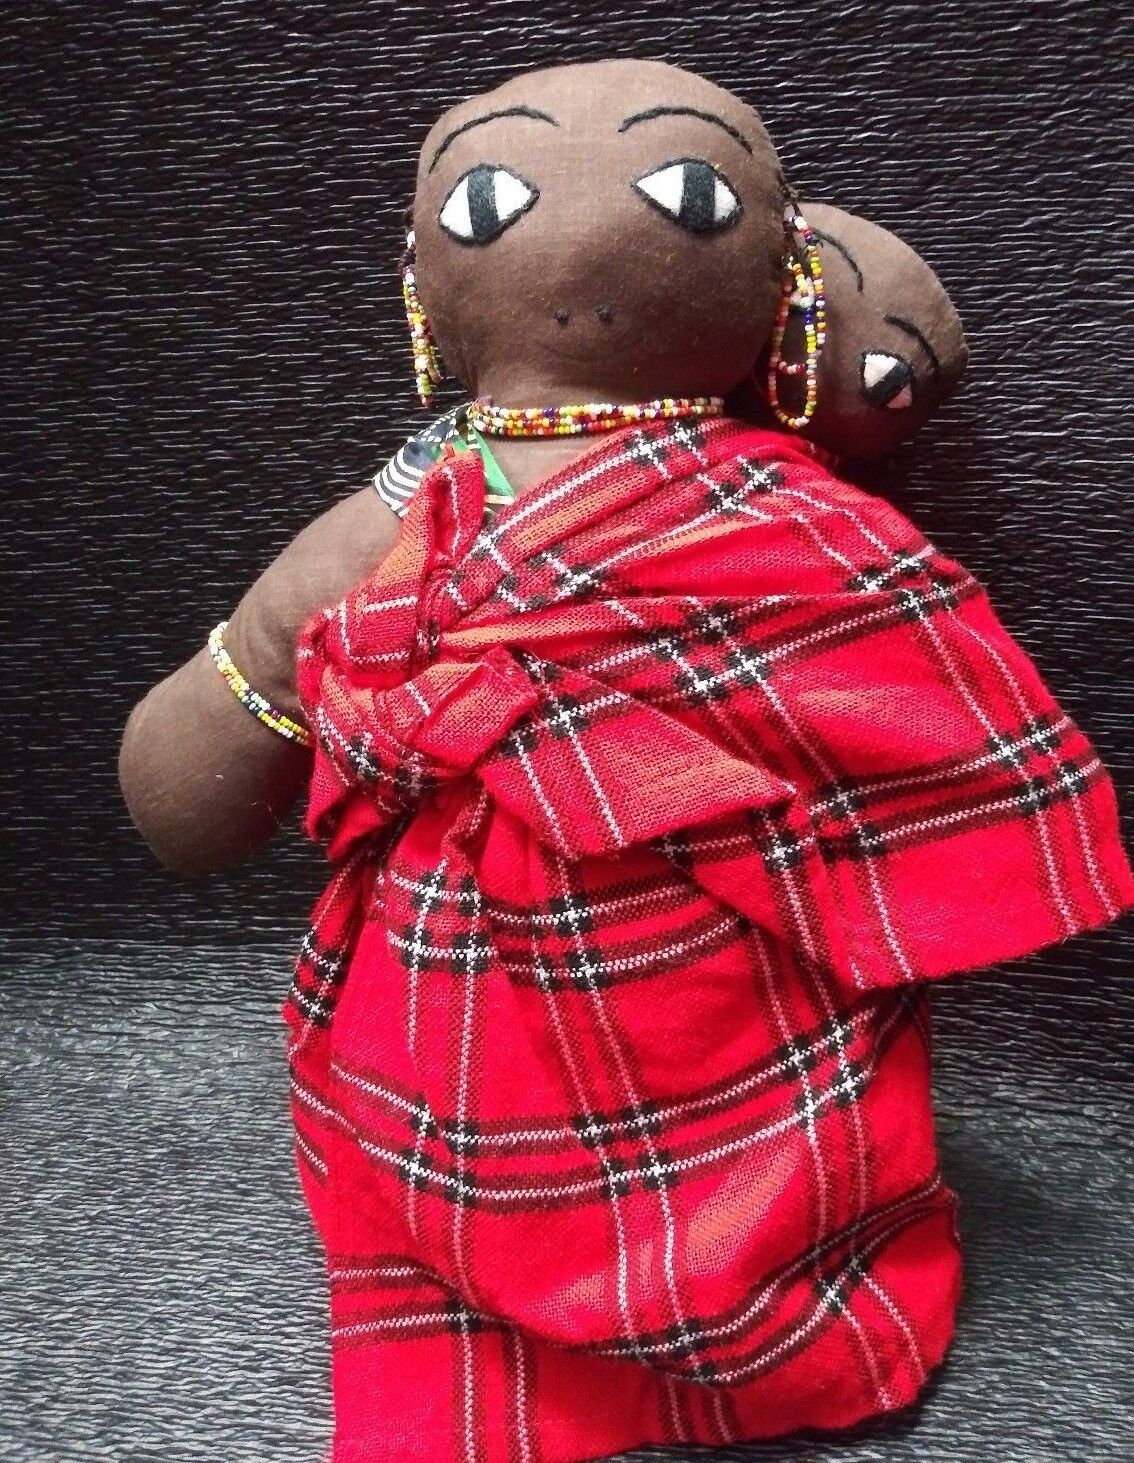 African Doll handmade Mother carrying baby on her back Kwanzaa celebration 16